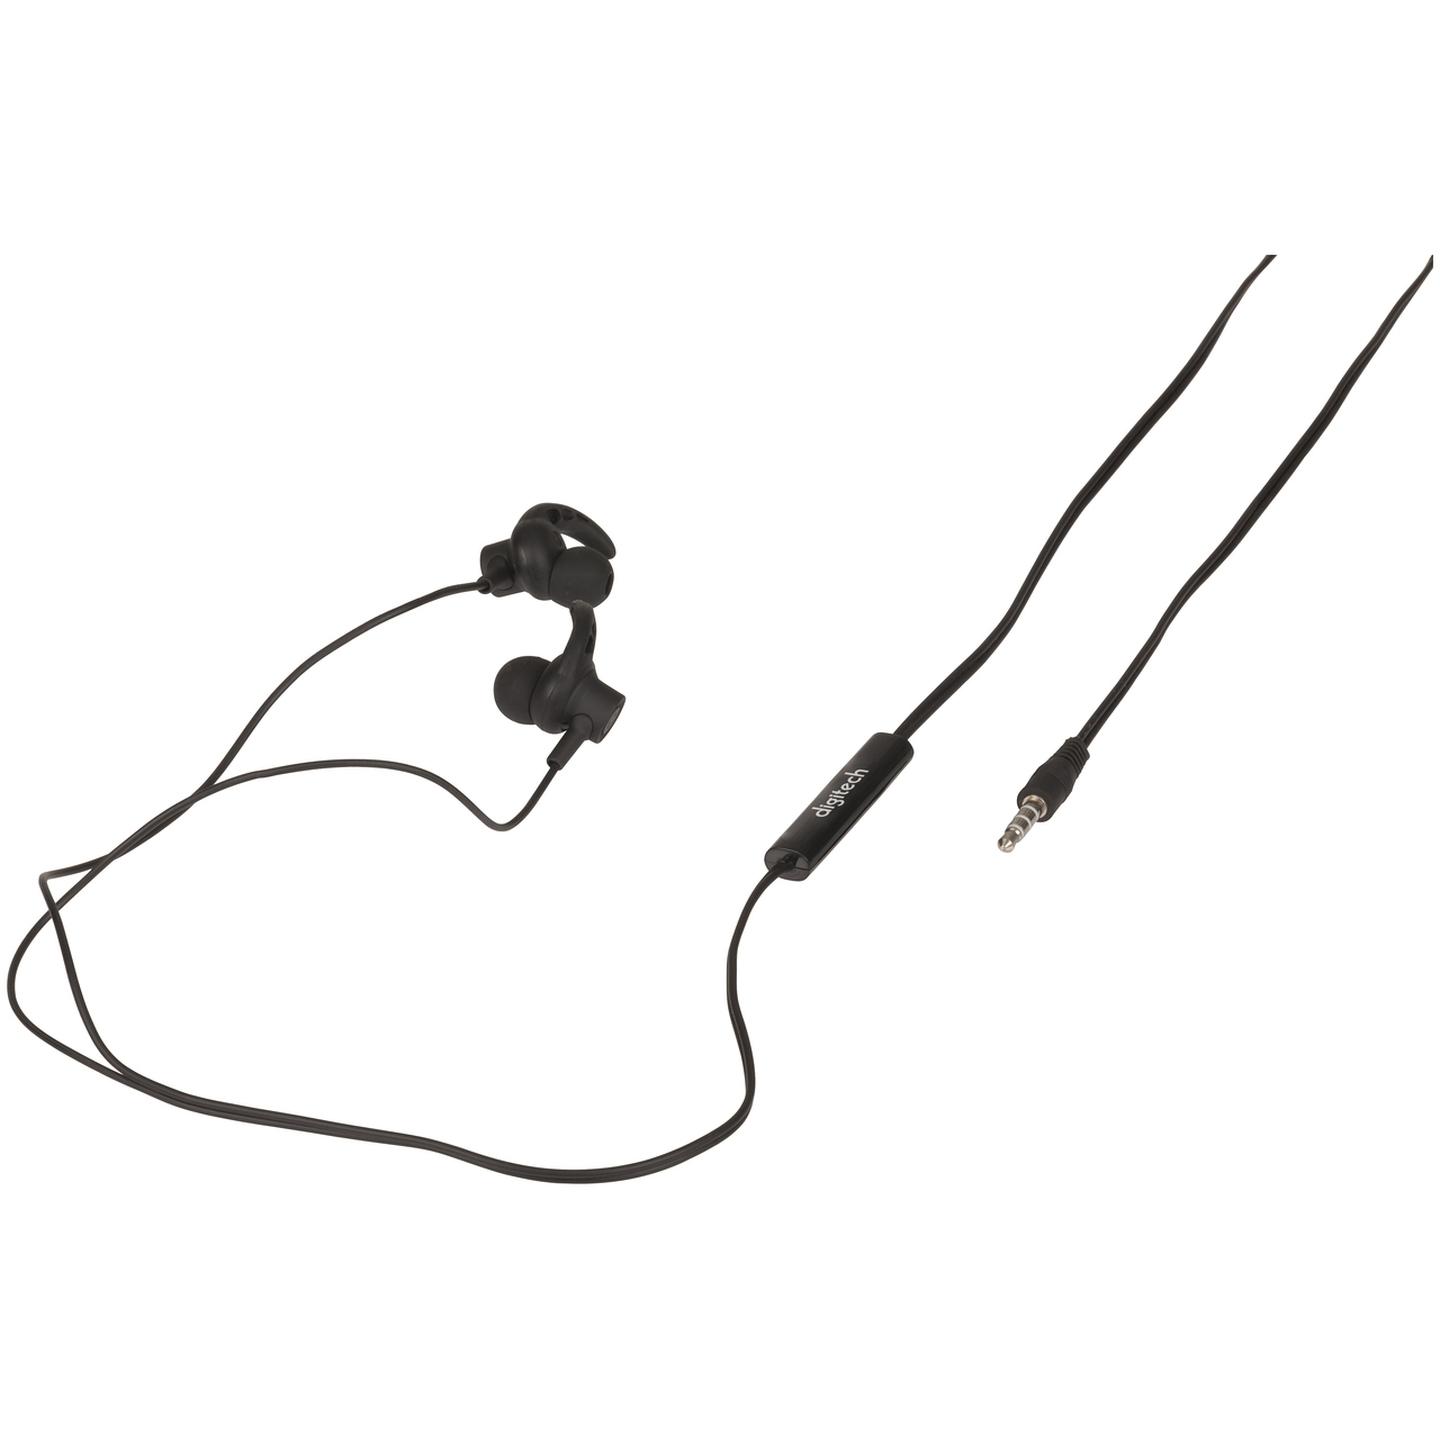 Digitech Stereo Canal Earphones with Microphone